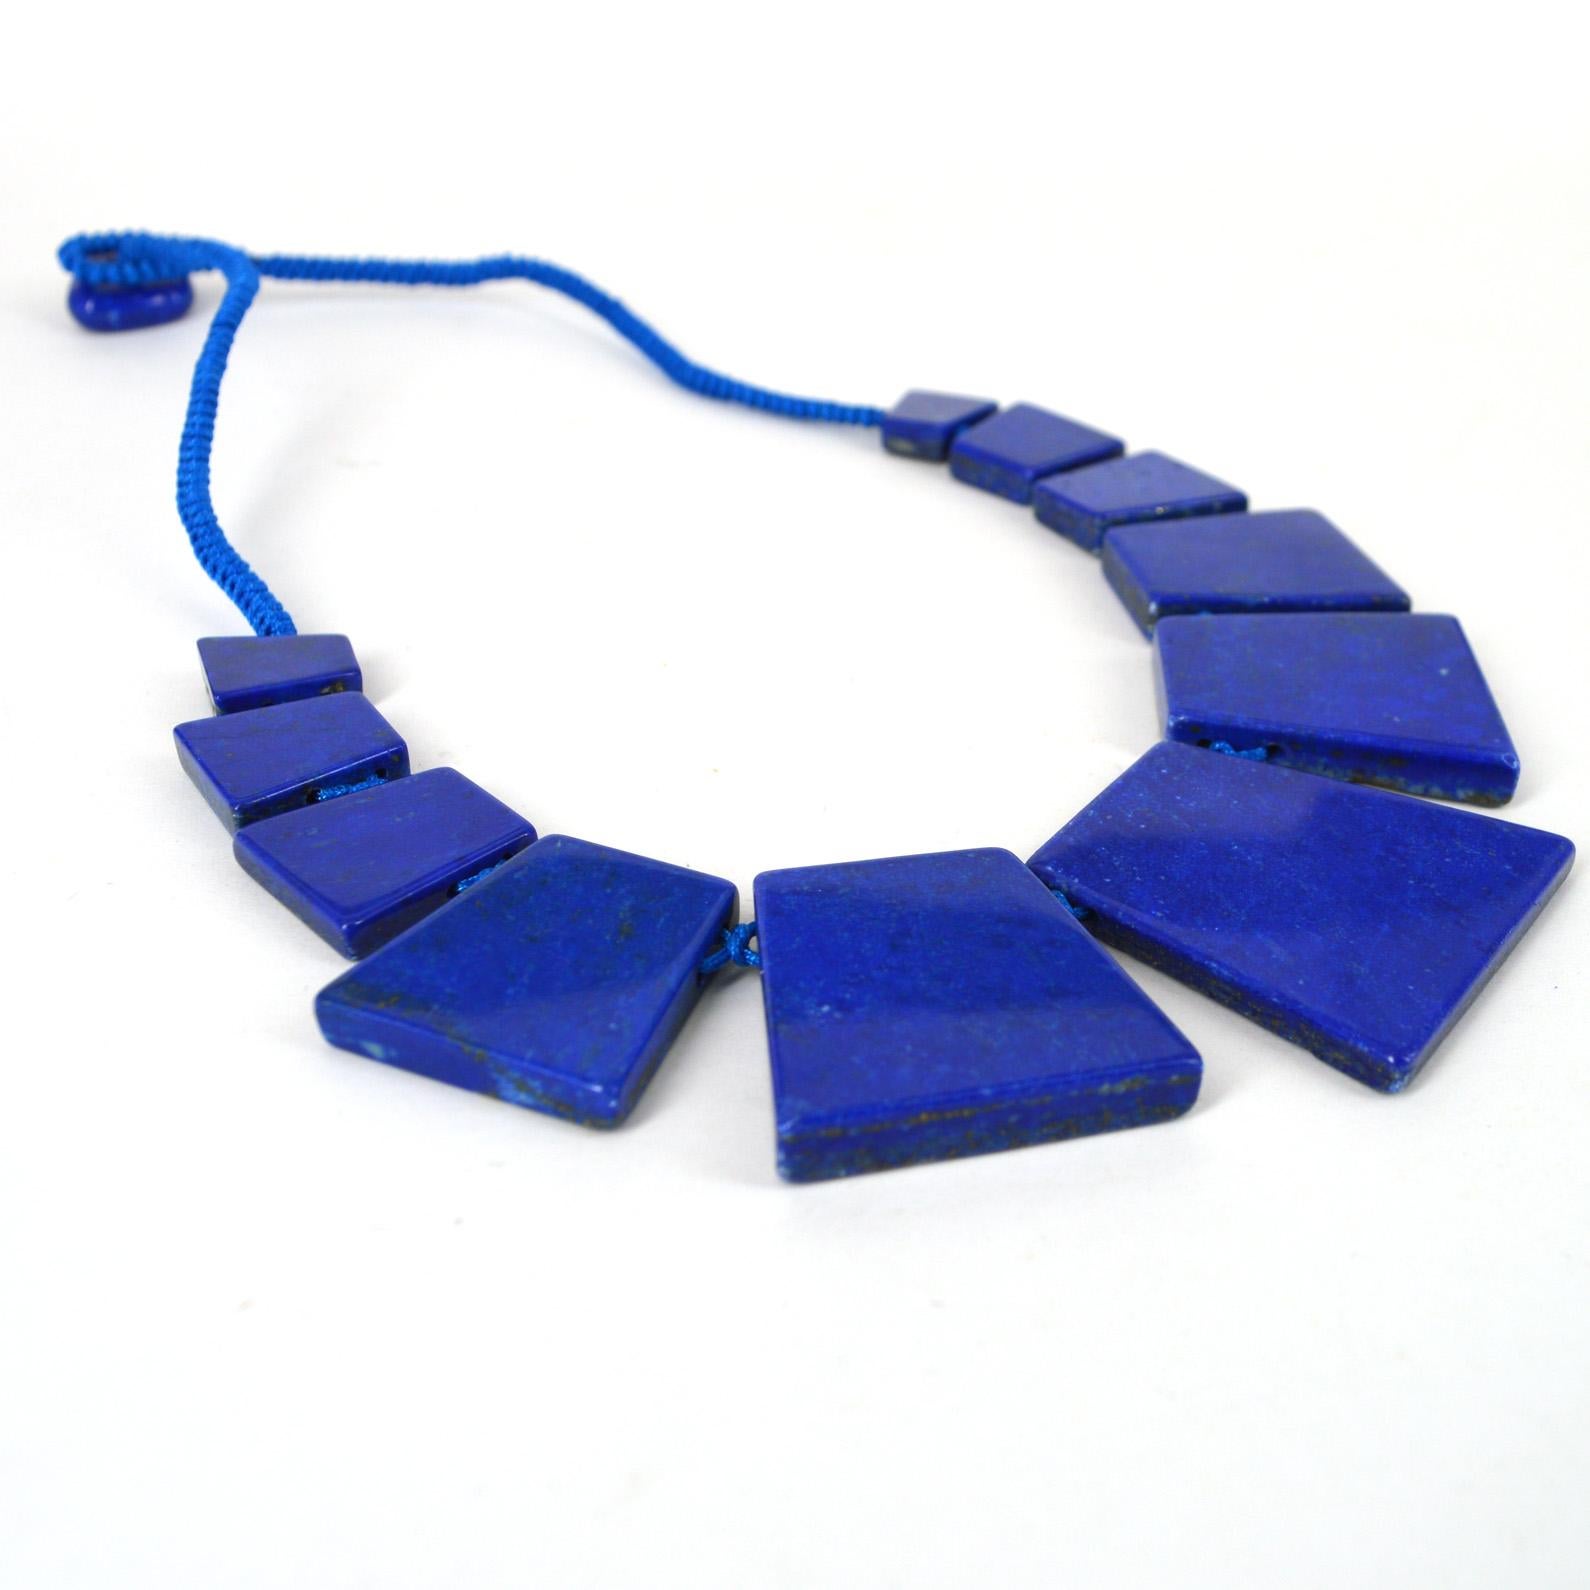 High Quality large natural Graduated Trapezoid Lapis Lazuli knotted necklace with a button Lapis Lazuli clasp. Beads Range from 15-42mm high and the stones are 6mm thick .

Total necklace length 52mm.